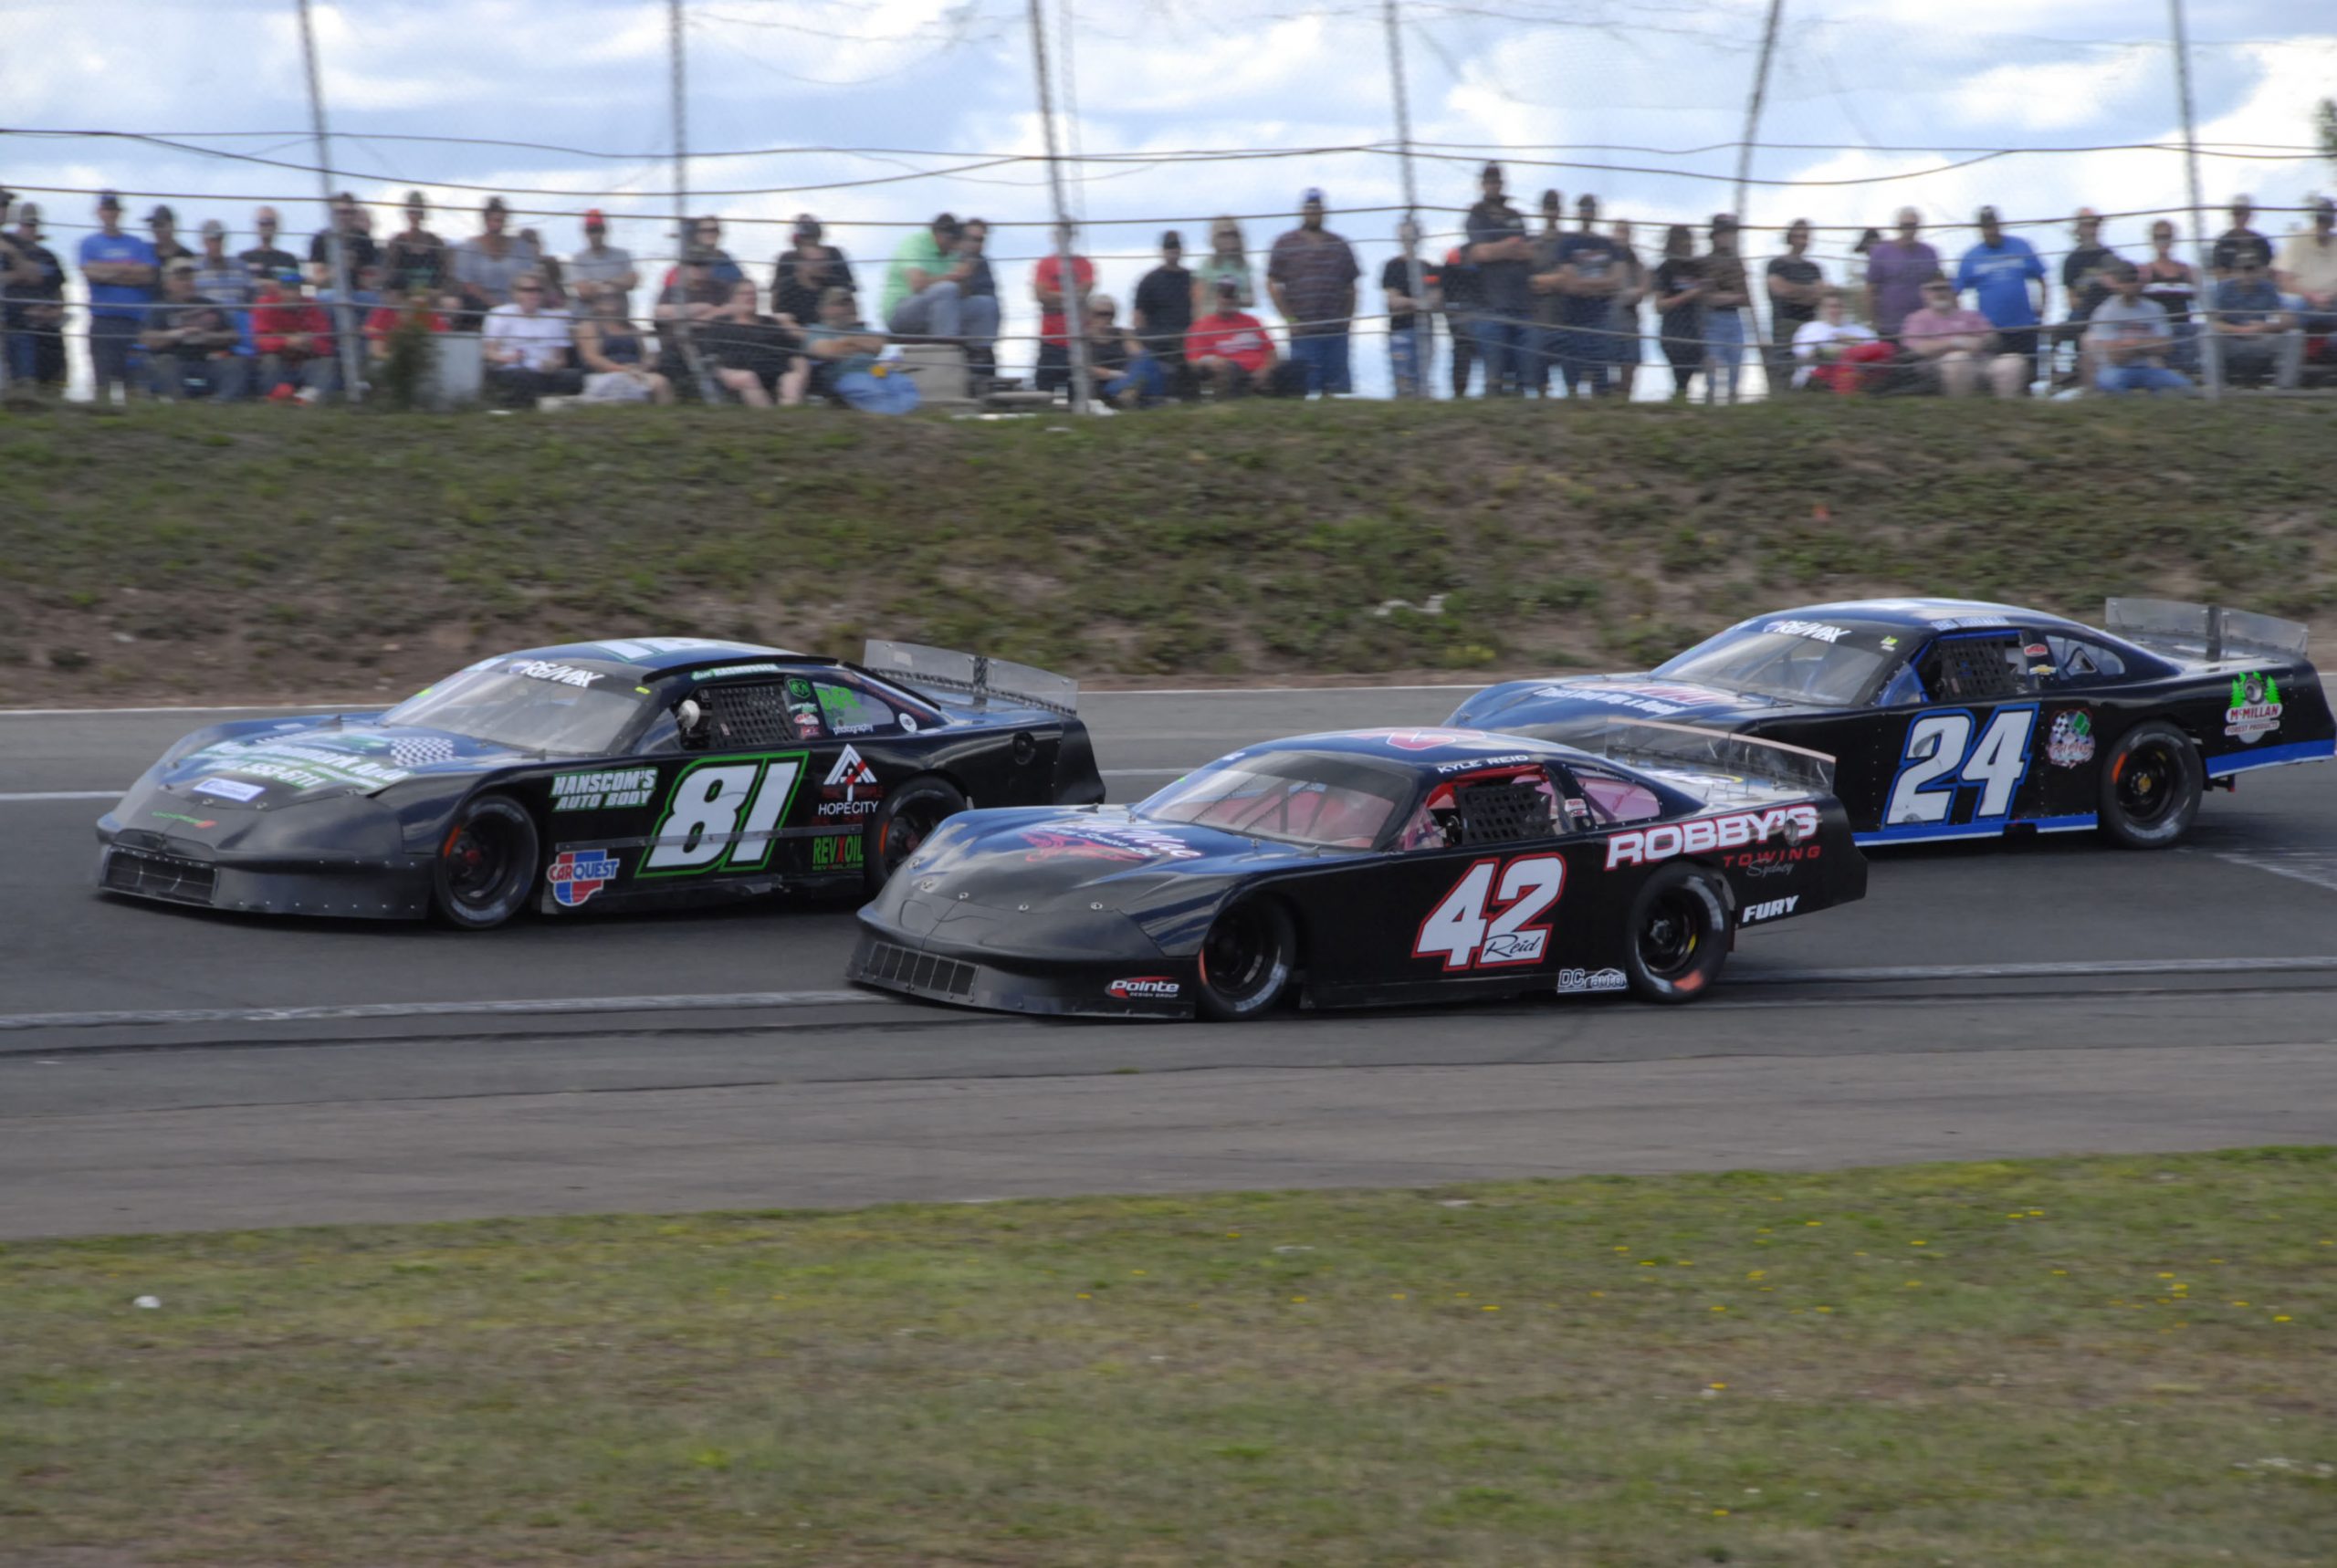 THE 21ST RE/MAX EAST COAST ELITE REALTY 250 ANCHORS SPEEDWEEKEND 2021 SUNDAY AT SPEEDWAY 660